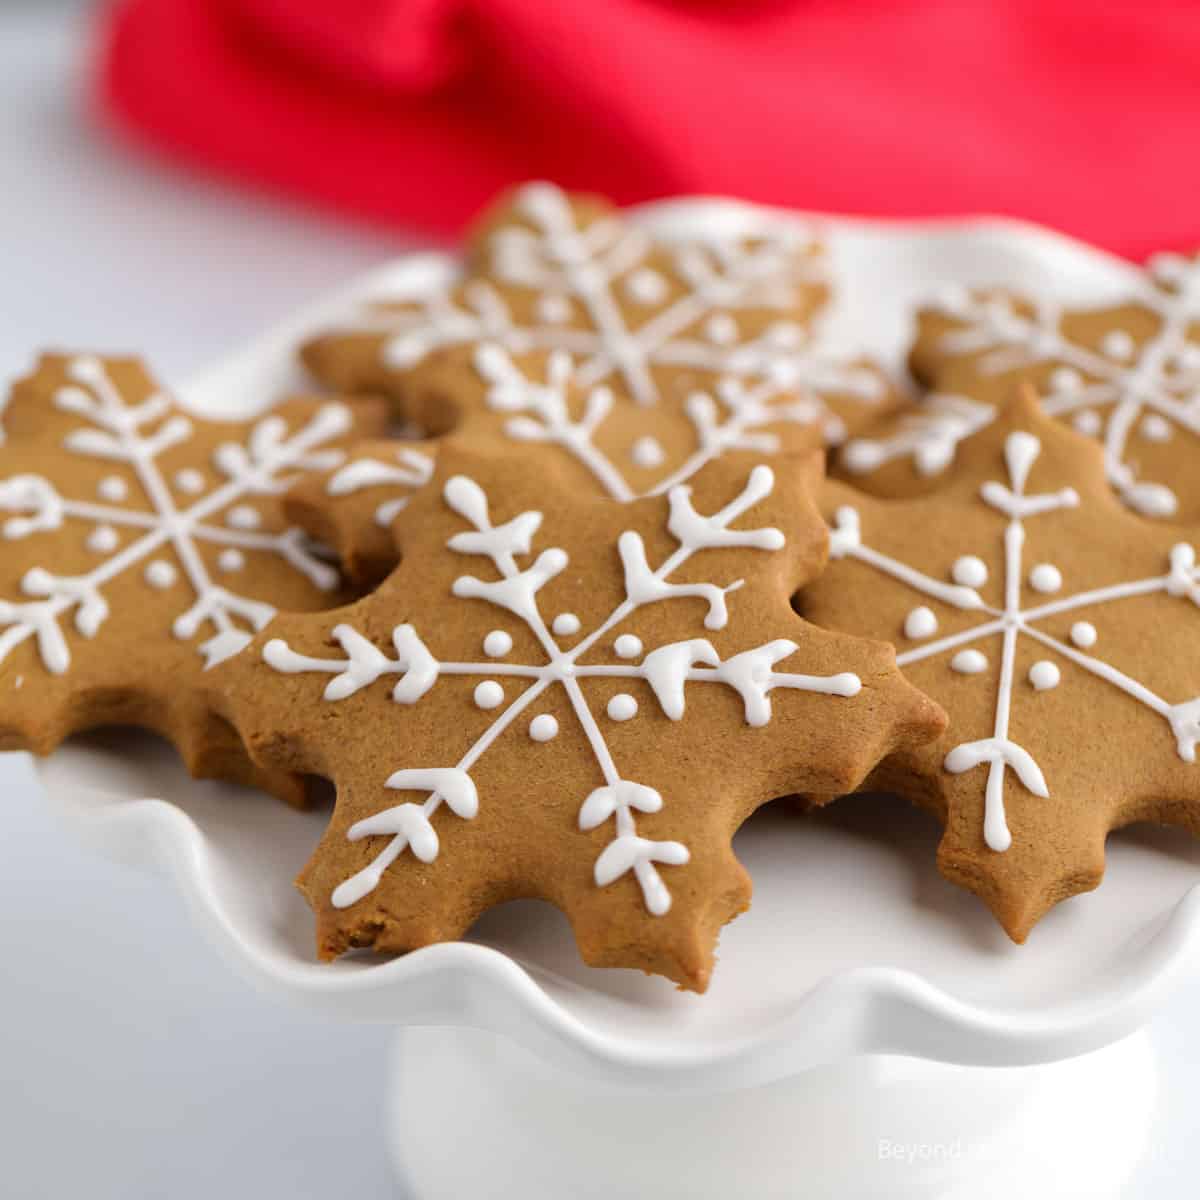 Gingerbread cookies with piped white frosting.